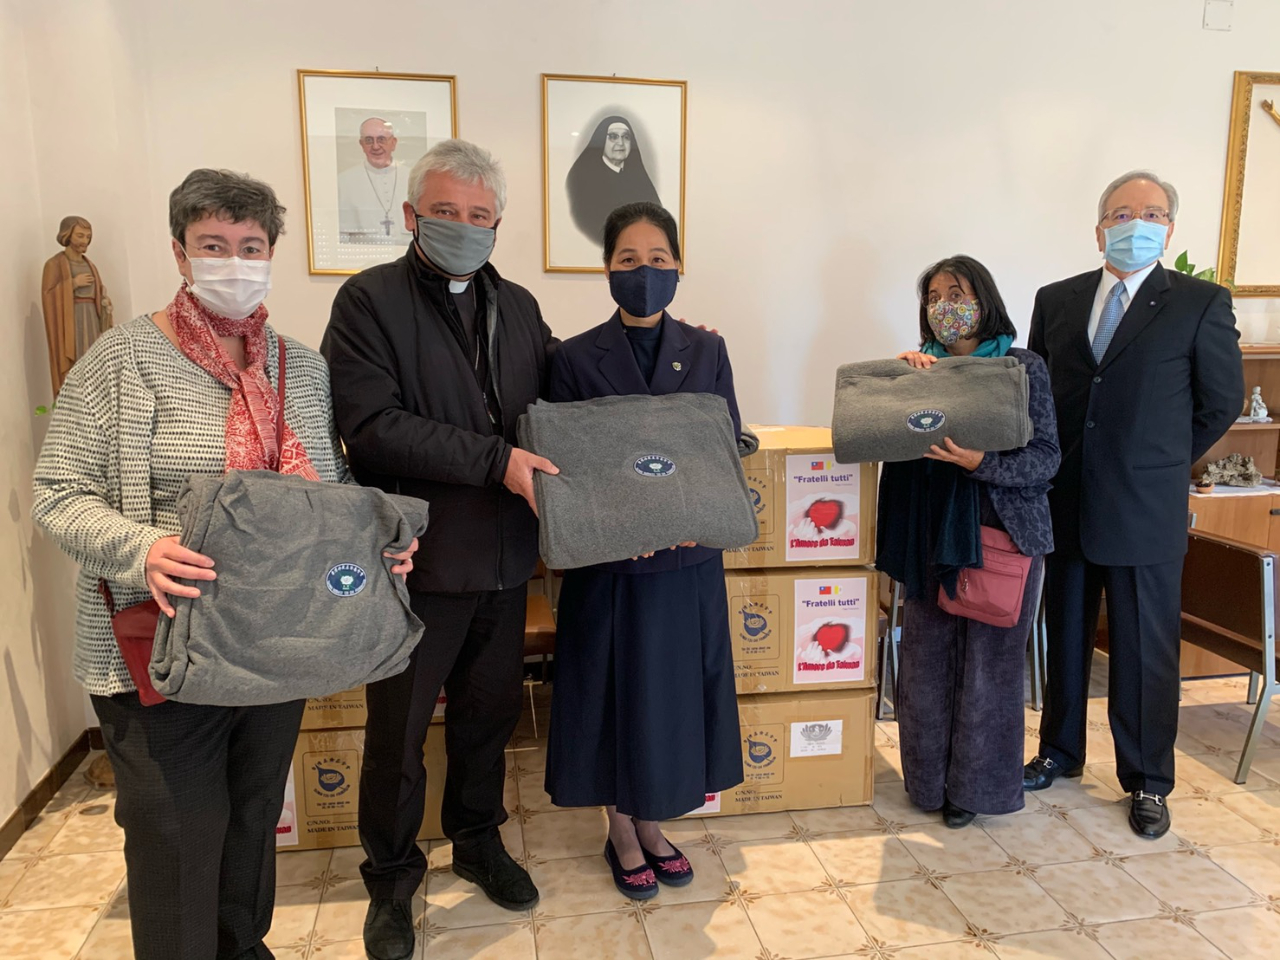 On October 21 at Villa Serena, Ambassador Lee, presented Cardinal Krajewski with 65 eco-blankets made in Taiwan with recycled plastic bottles and inspired by the spirit of Laudato sì. The blankets, which were provided by Tzu-Chi Buddhist Charity Foundation, will be distributed to the migrant women sheltered in the building lent by the Sisters Servants of the Divine Providence of Catania to the Pope through the Papal Almoner. The migrants arrived in Italy through the Humanitarian Corridors program. 